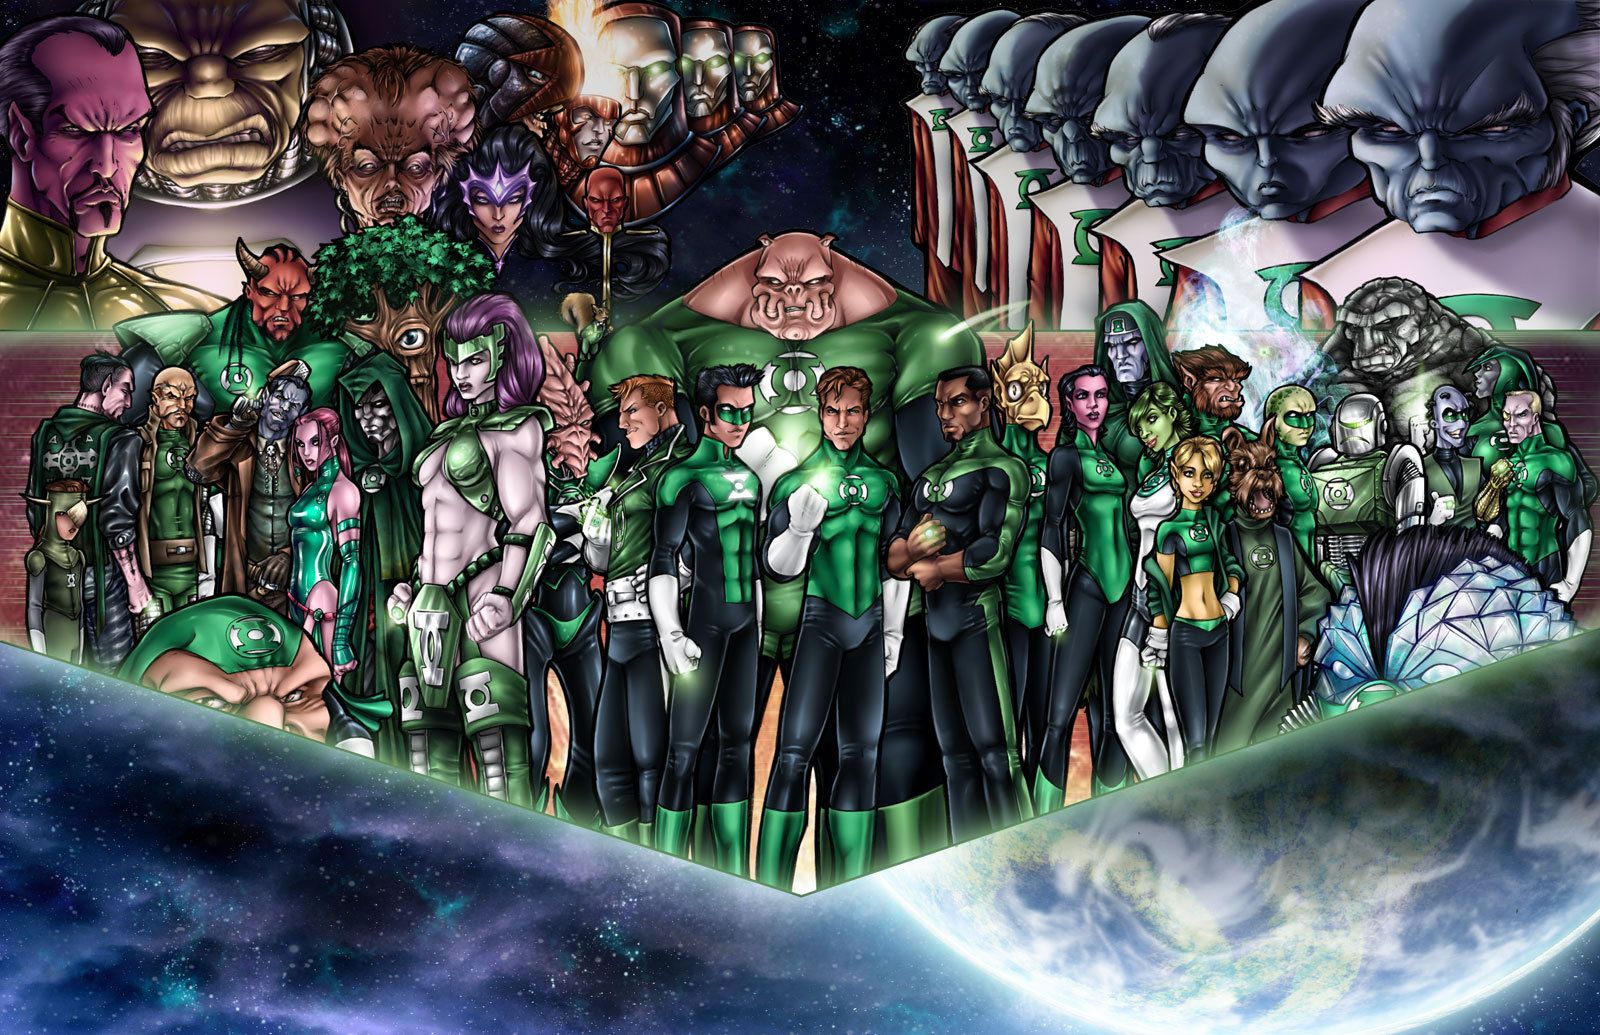 Free download Green Lantern Corps by AdamWithers [1600x1035] for your Desktop, Mobile & Tablet. Explore Green Lantern Corps Wallpaper. Green Lantern Wallpaper, Green Lantern Logo Wallpaper, Blue Lantern Wallpaper